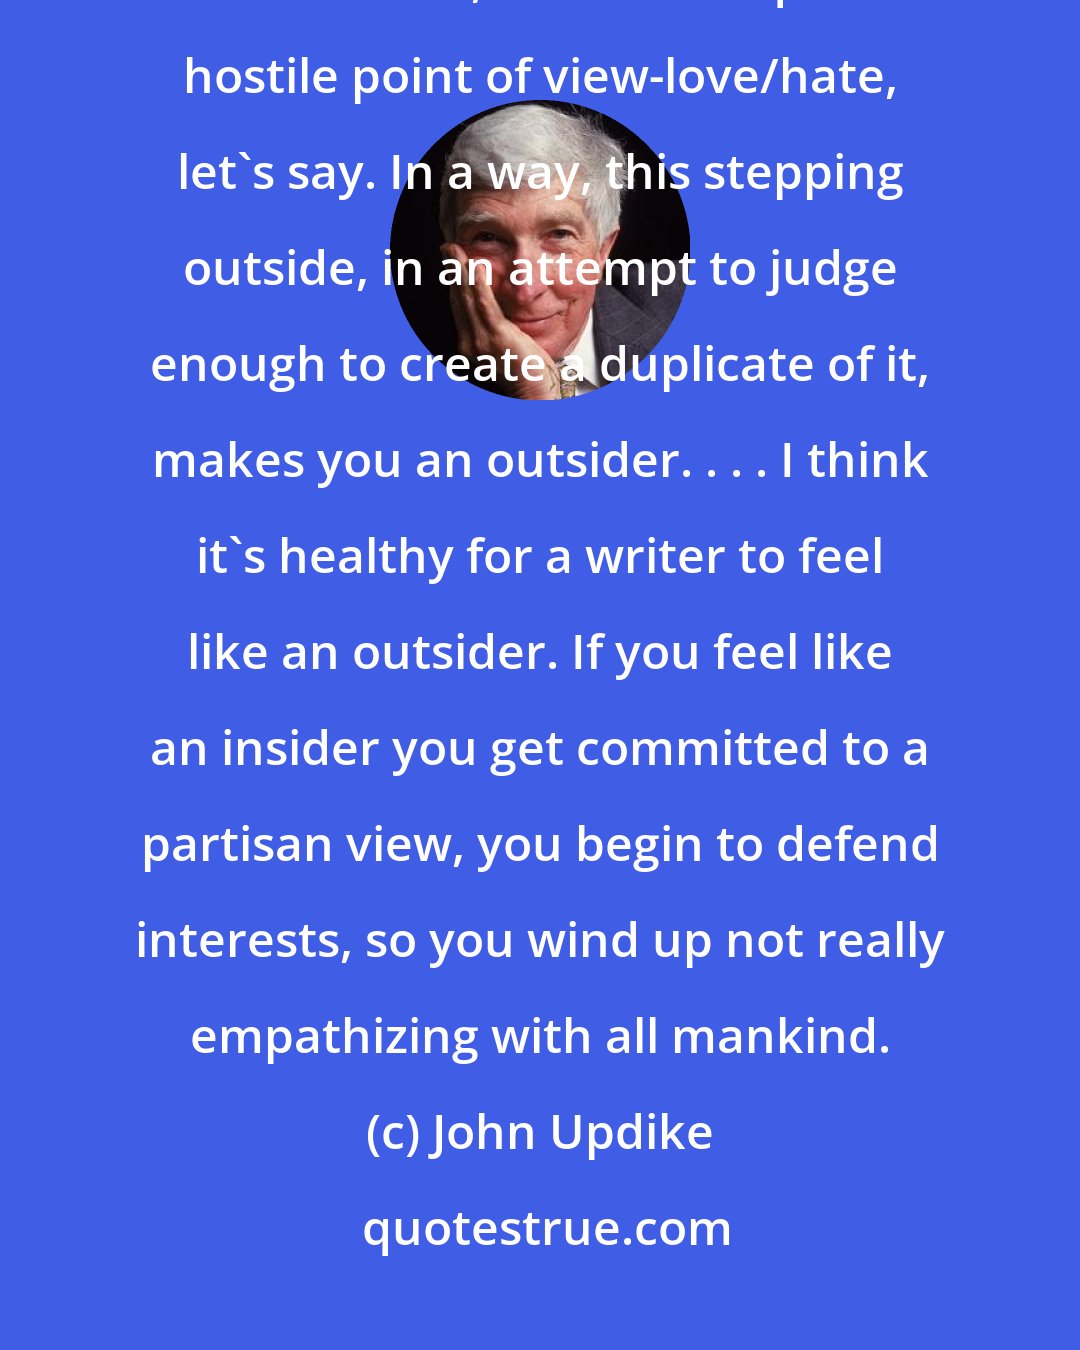 John Updike: Most writers begin with accounts of their first home, their family, and the town, often from quite a hostile point of view-love/hate, let's say. In a way, this stepping outside, in an attempt to judge enough to create a duplicate of it, makes you an outsider. . . . I think it's healthy for a writer to feel like an outsider. If you feel like an insider you get committed to a partisan view, you begin to defend interests, so you wind up not really empathizing with all mankind.